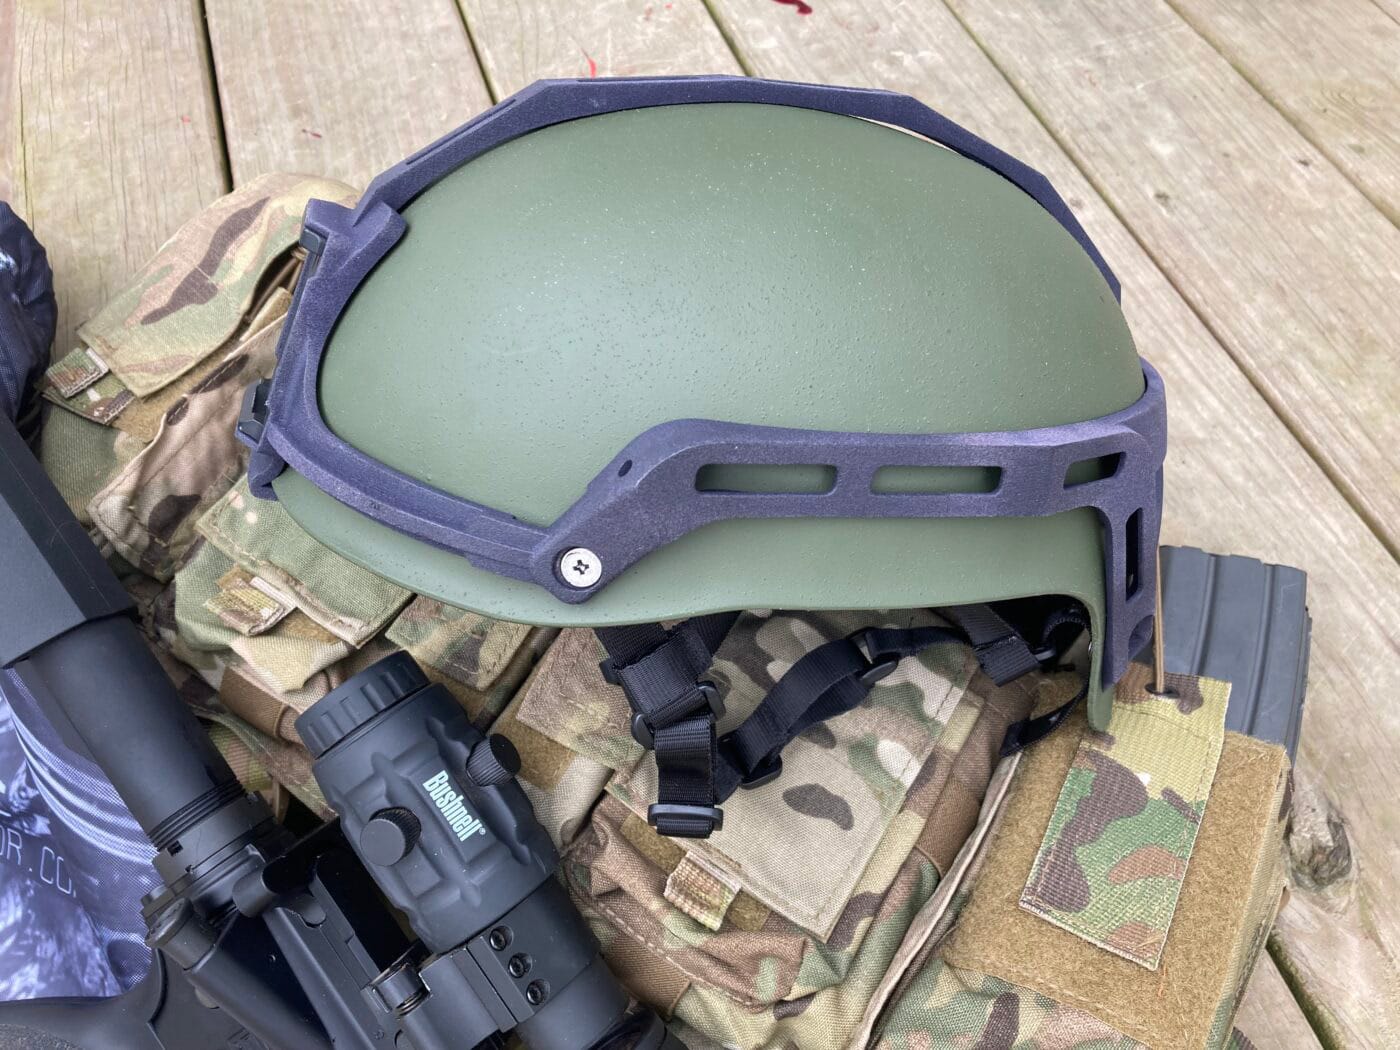 Adept Armor helmet with AR-15 rifle and Mayflower chest rig